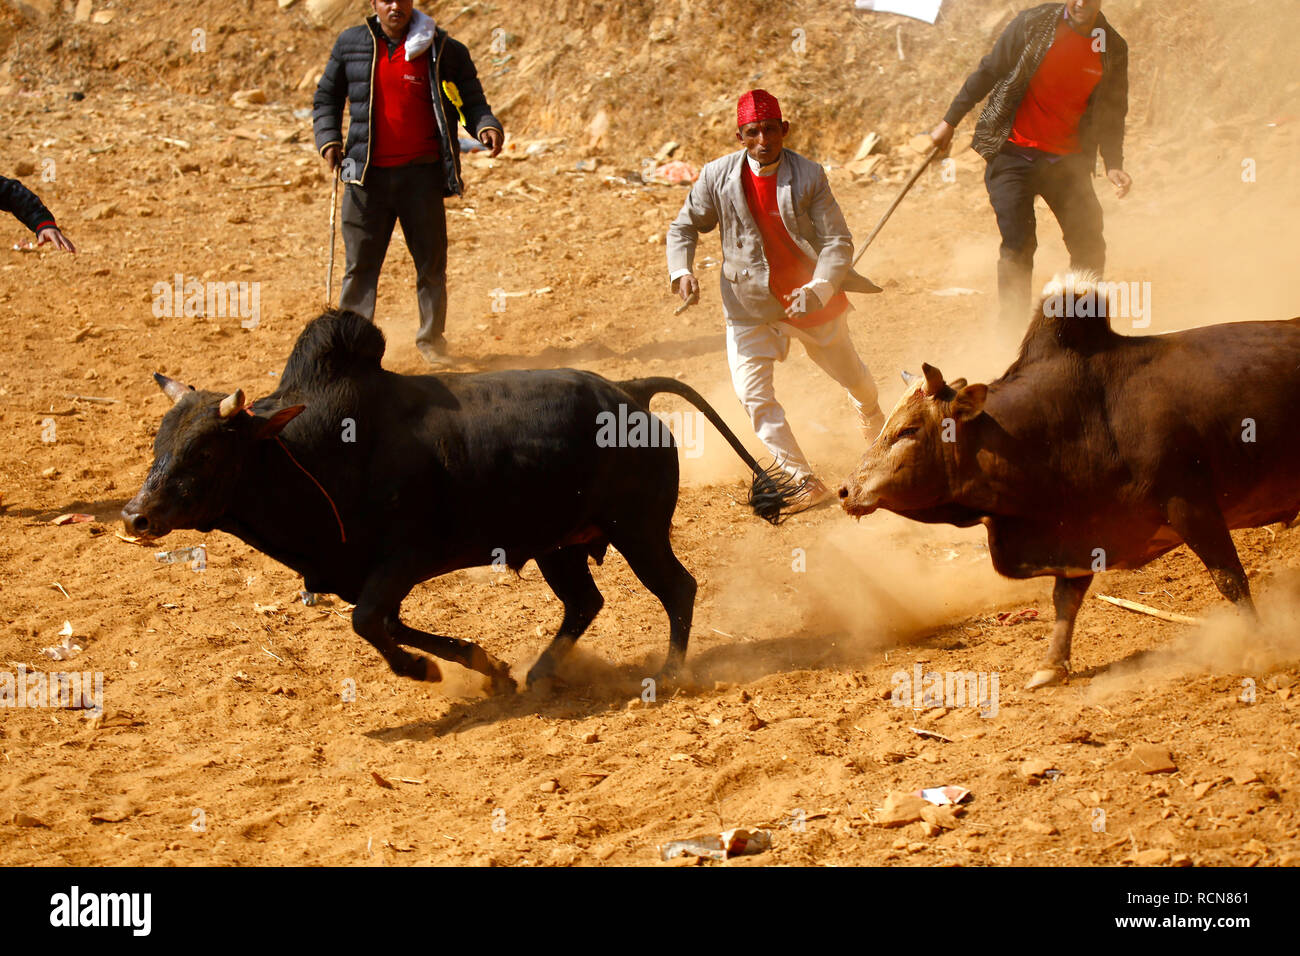 Bulls seen running after each other during the festival organized to mark Maghe Sangranti or Makar Sankranti festival. Thousands of people gathered at an open ground of Taruka village at Nuwakot district to witness a bull fighting festival that heralds the end of winter, according to the Hindu calendar. Stock Photo